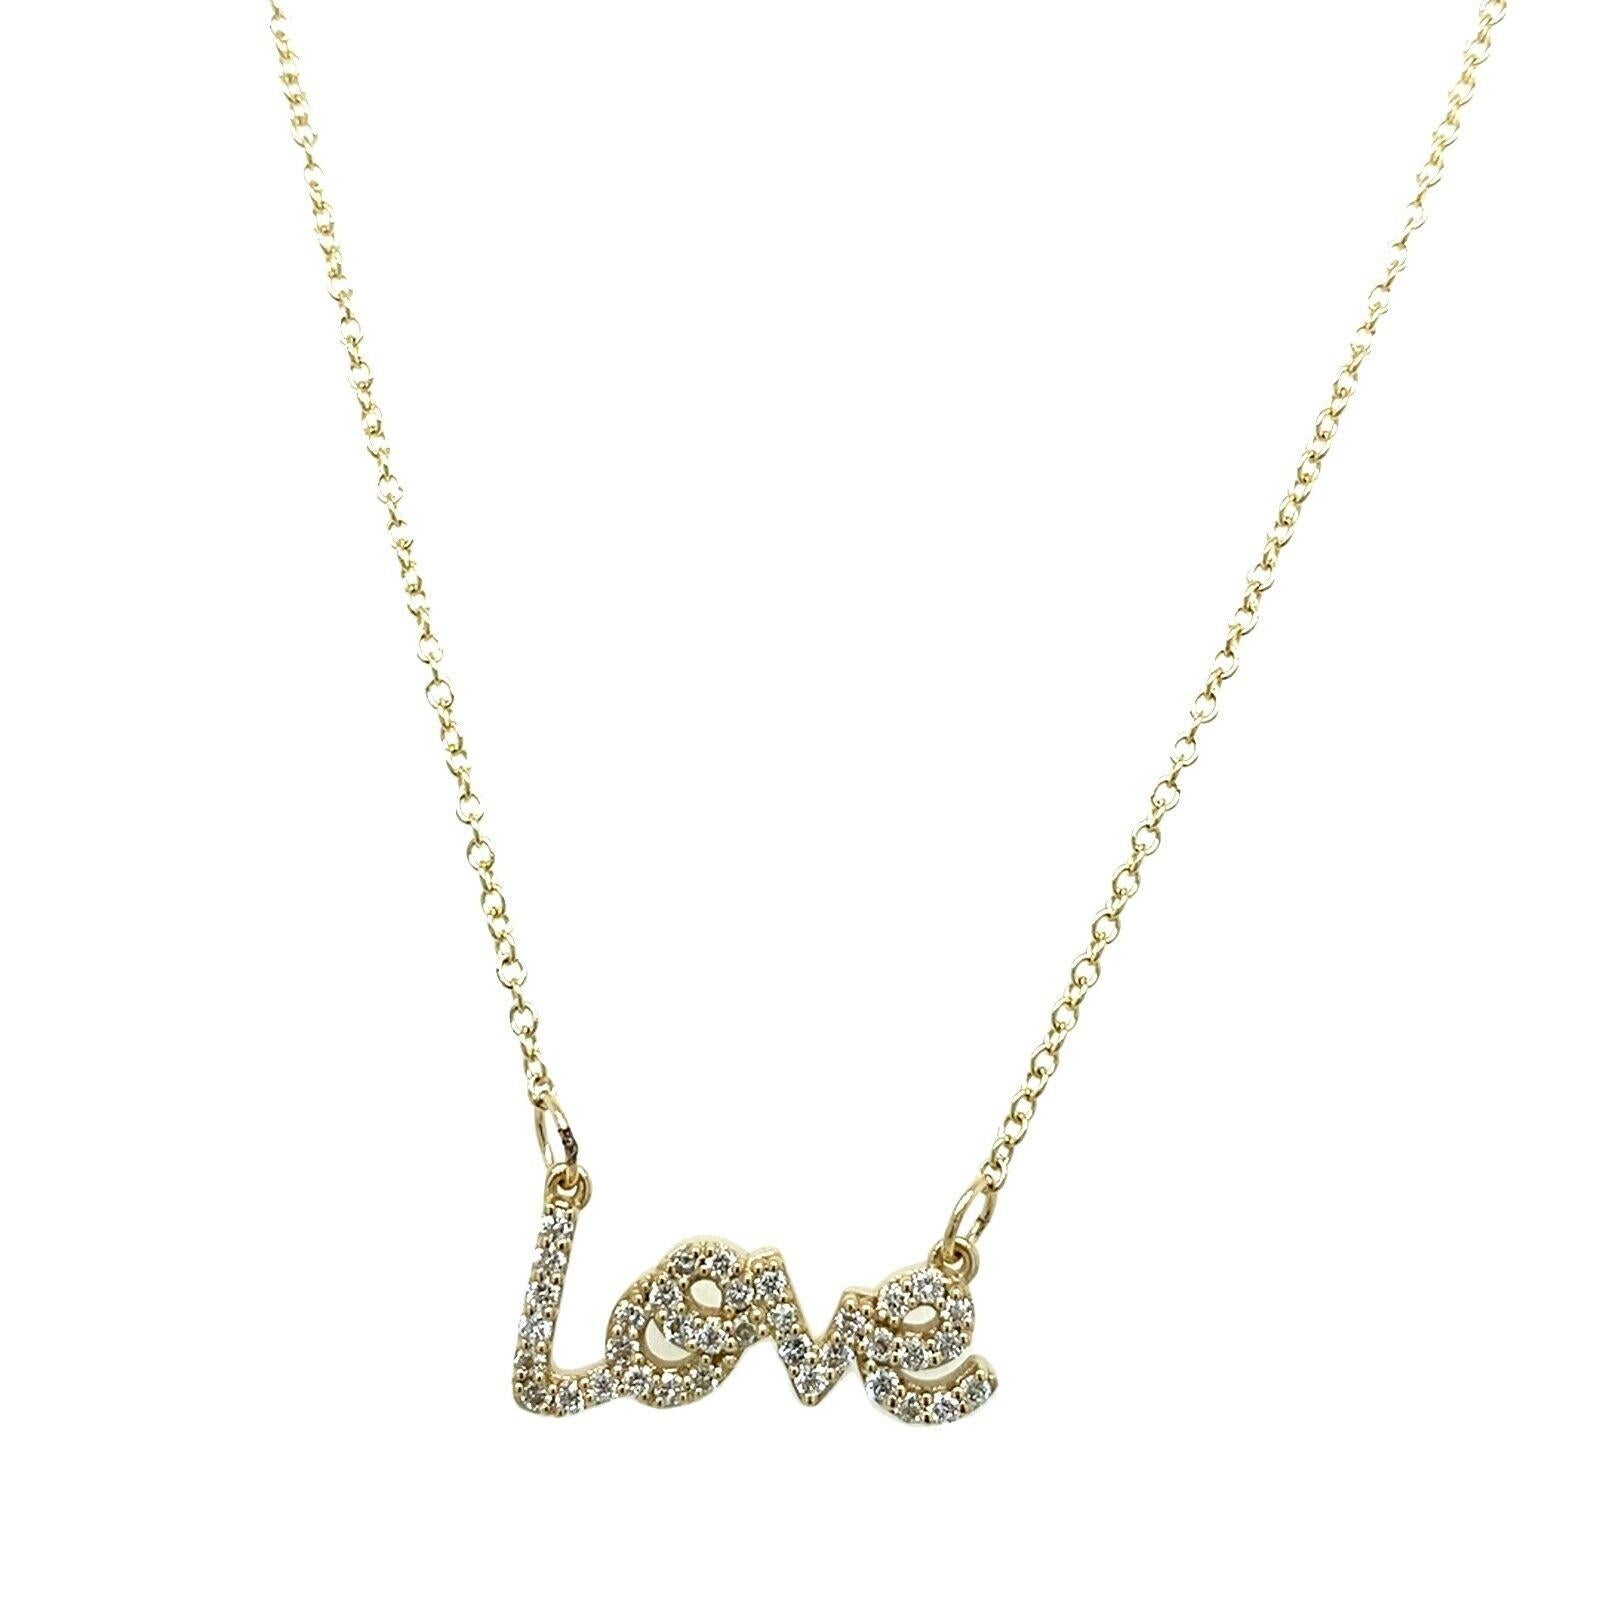 This Love pendant necklace is set with 0.23ct of diamonds and is the perfect gift for a loved one. The pendant is suspended from a 16